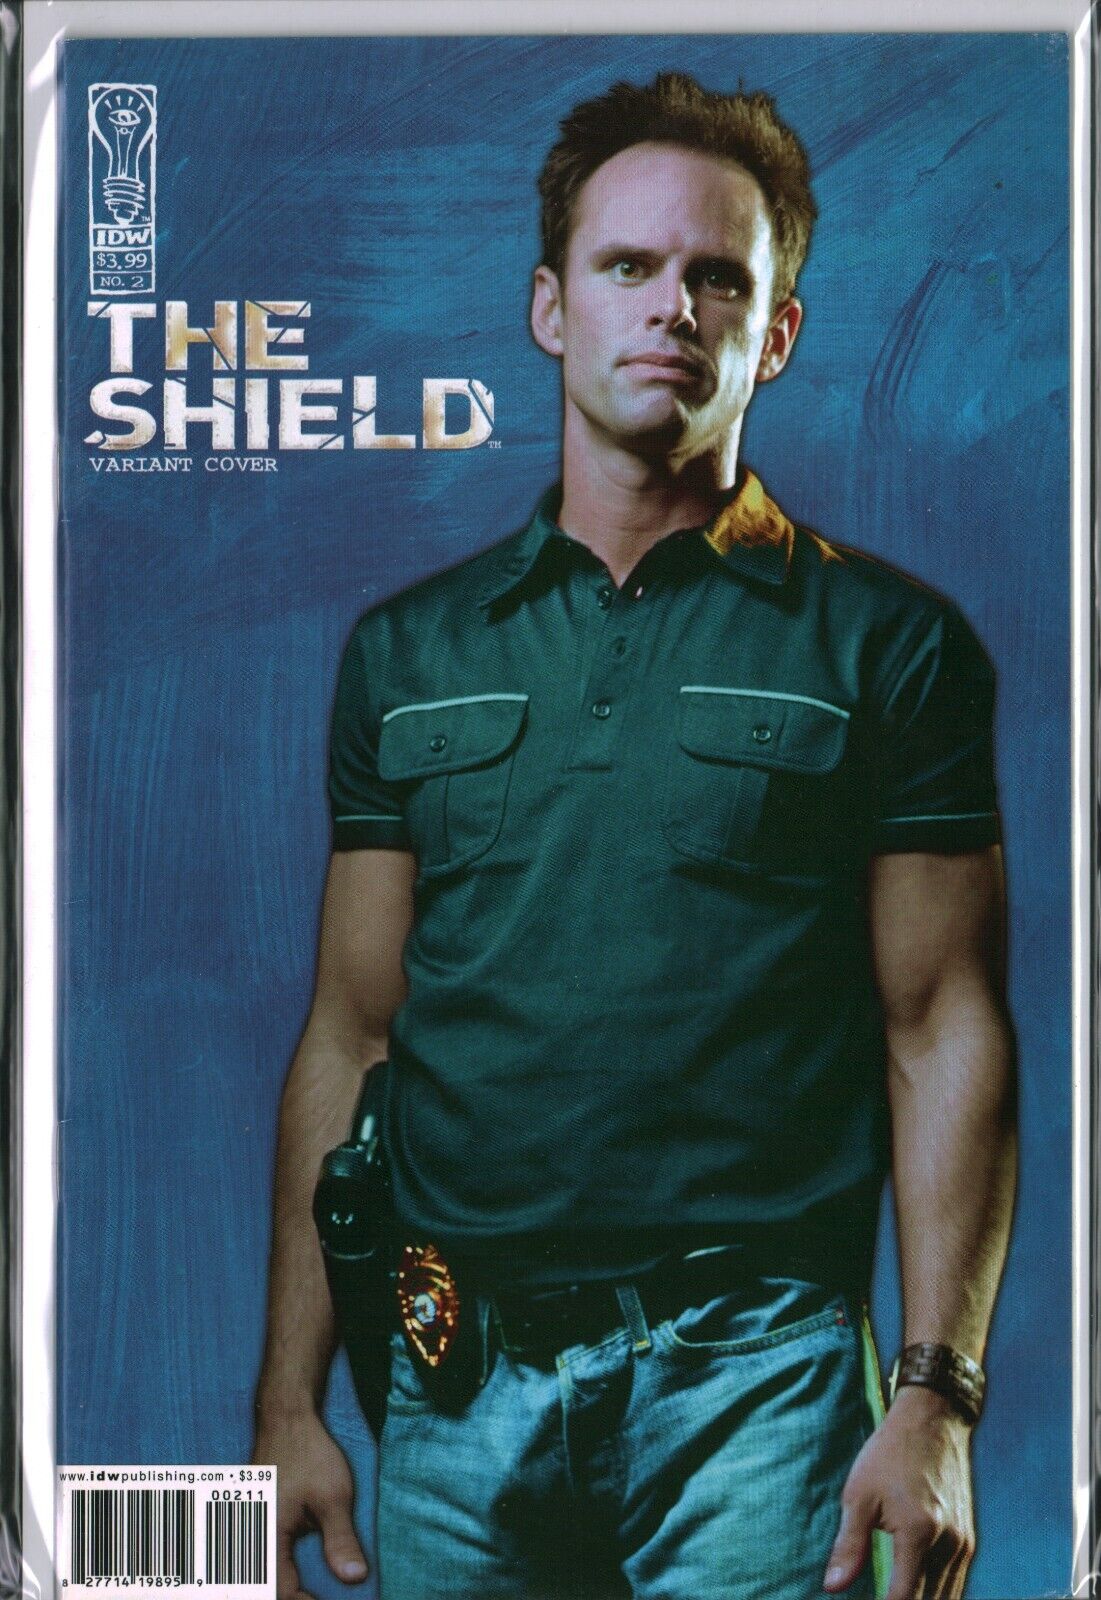 the SHIELD #2 TV Show IDW (2006) Photo Variant VF/NM  (9.0)